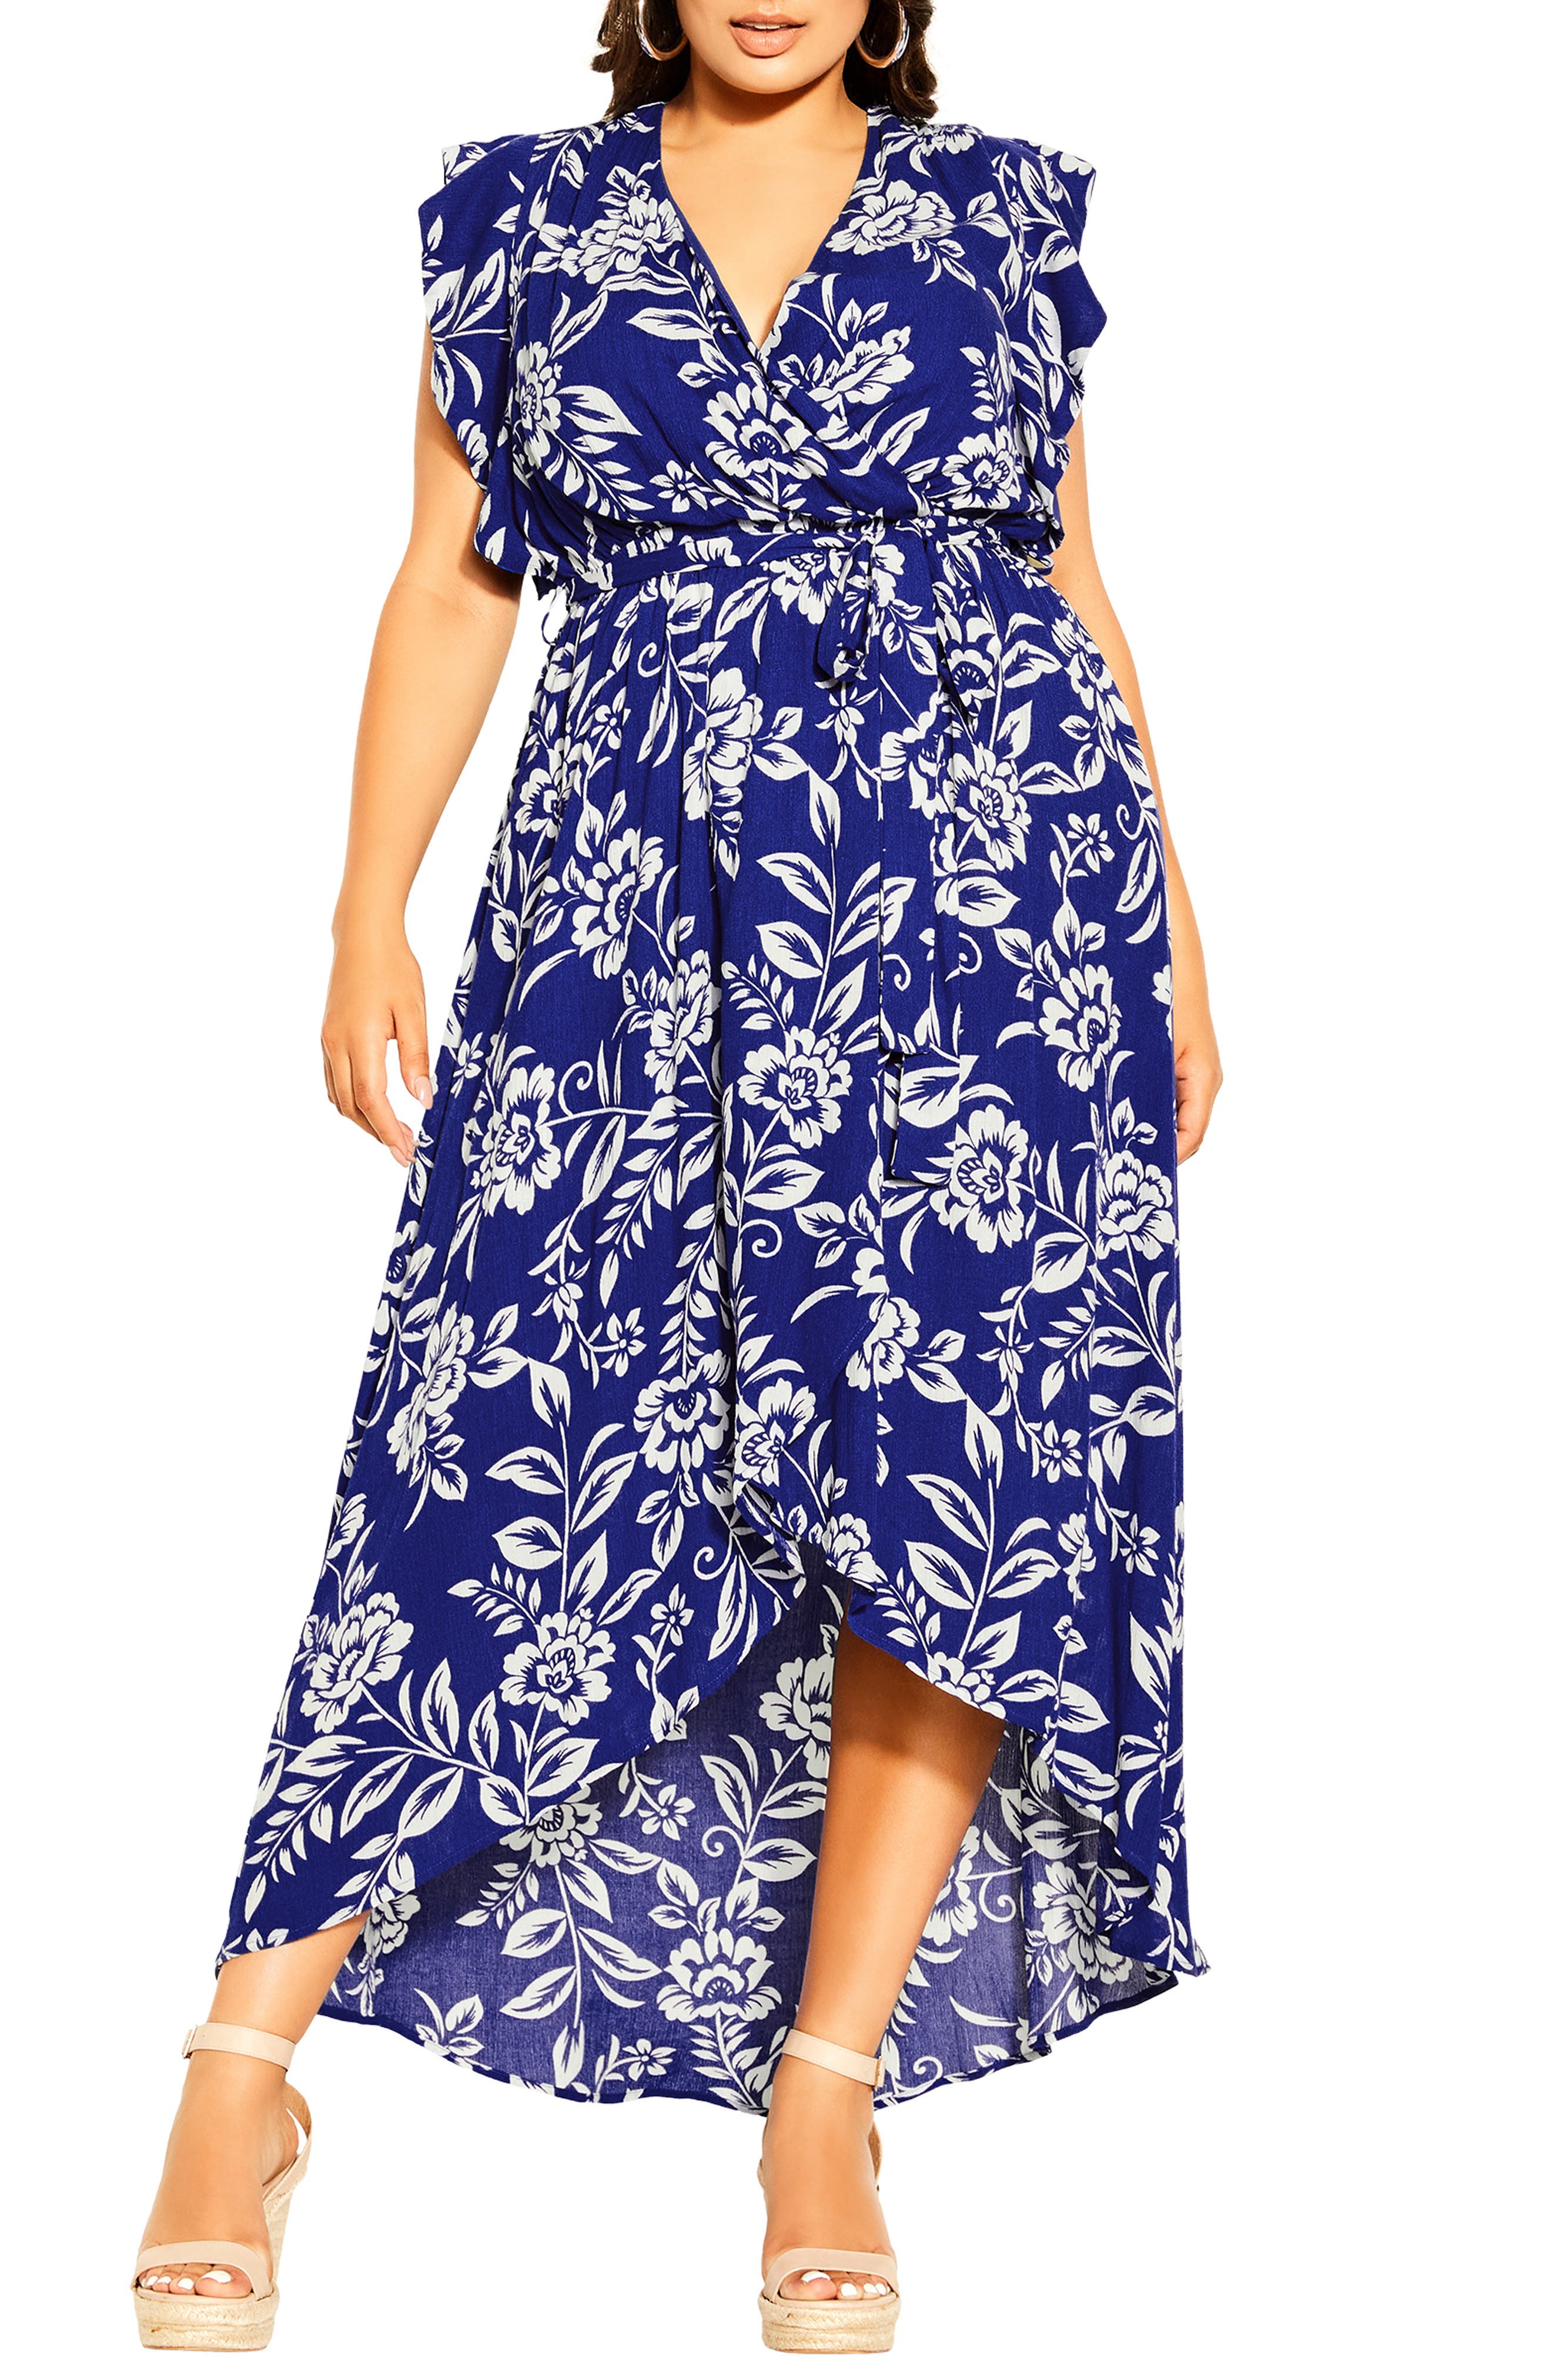 AMLLY Womens Floral Print V Neck 3/4 Sleeves Wrapped Long Casual Boho Maxi Dress with Belt 